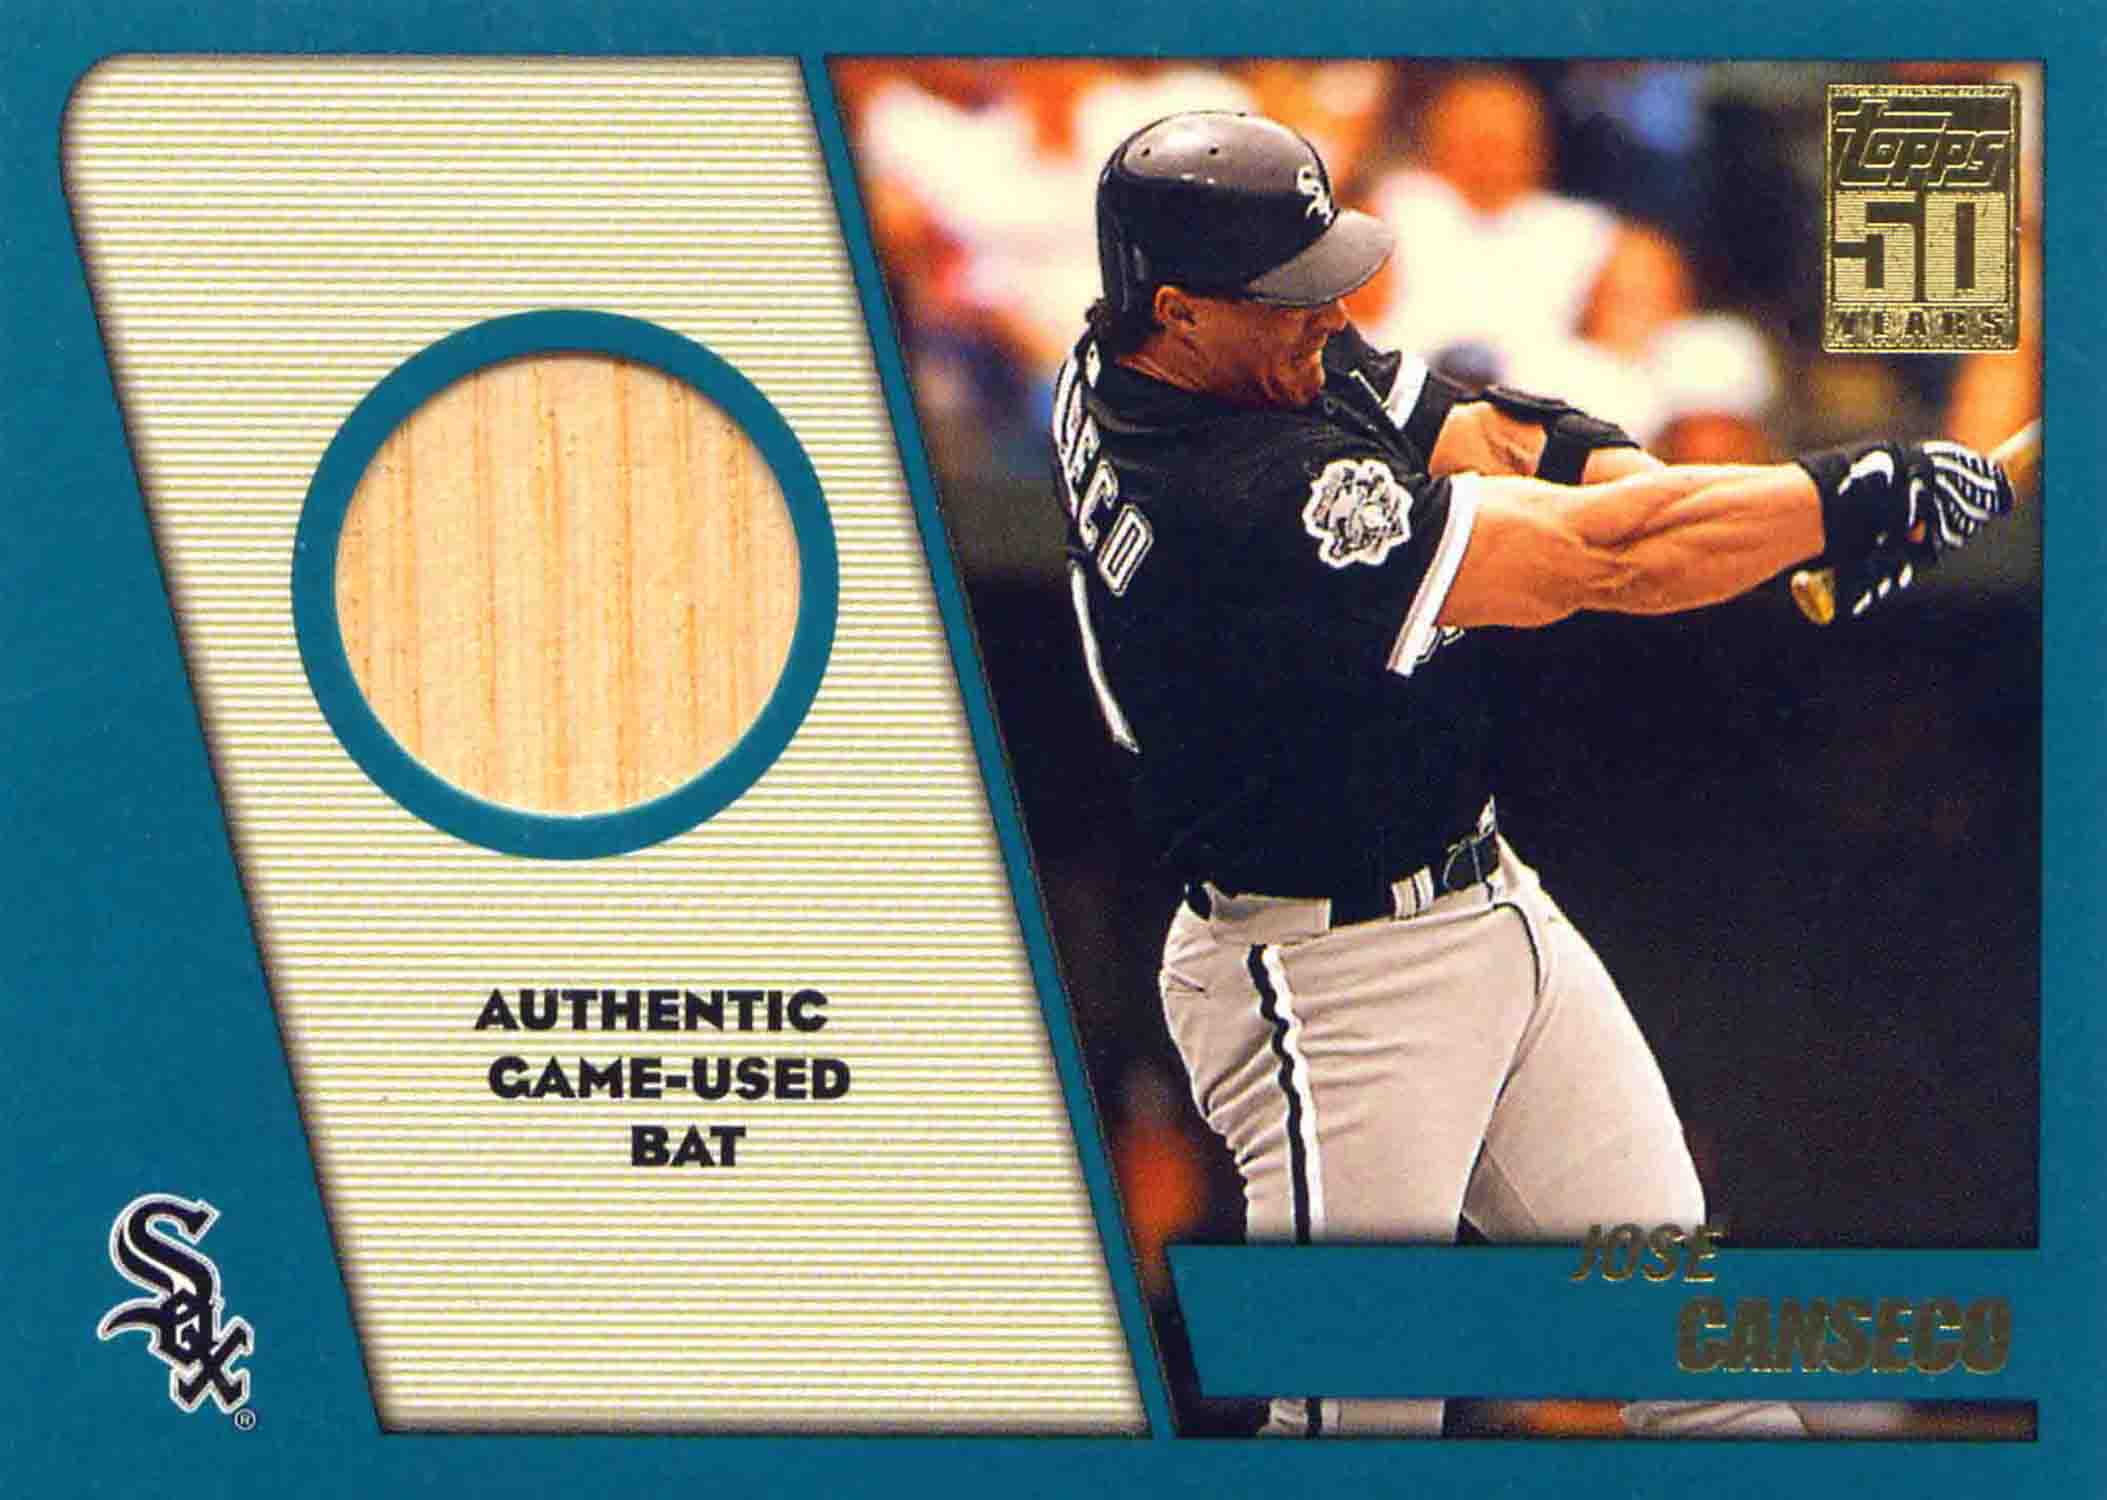 2001 Topps Traded Relics Bat